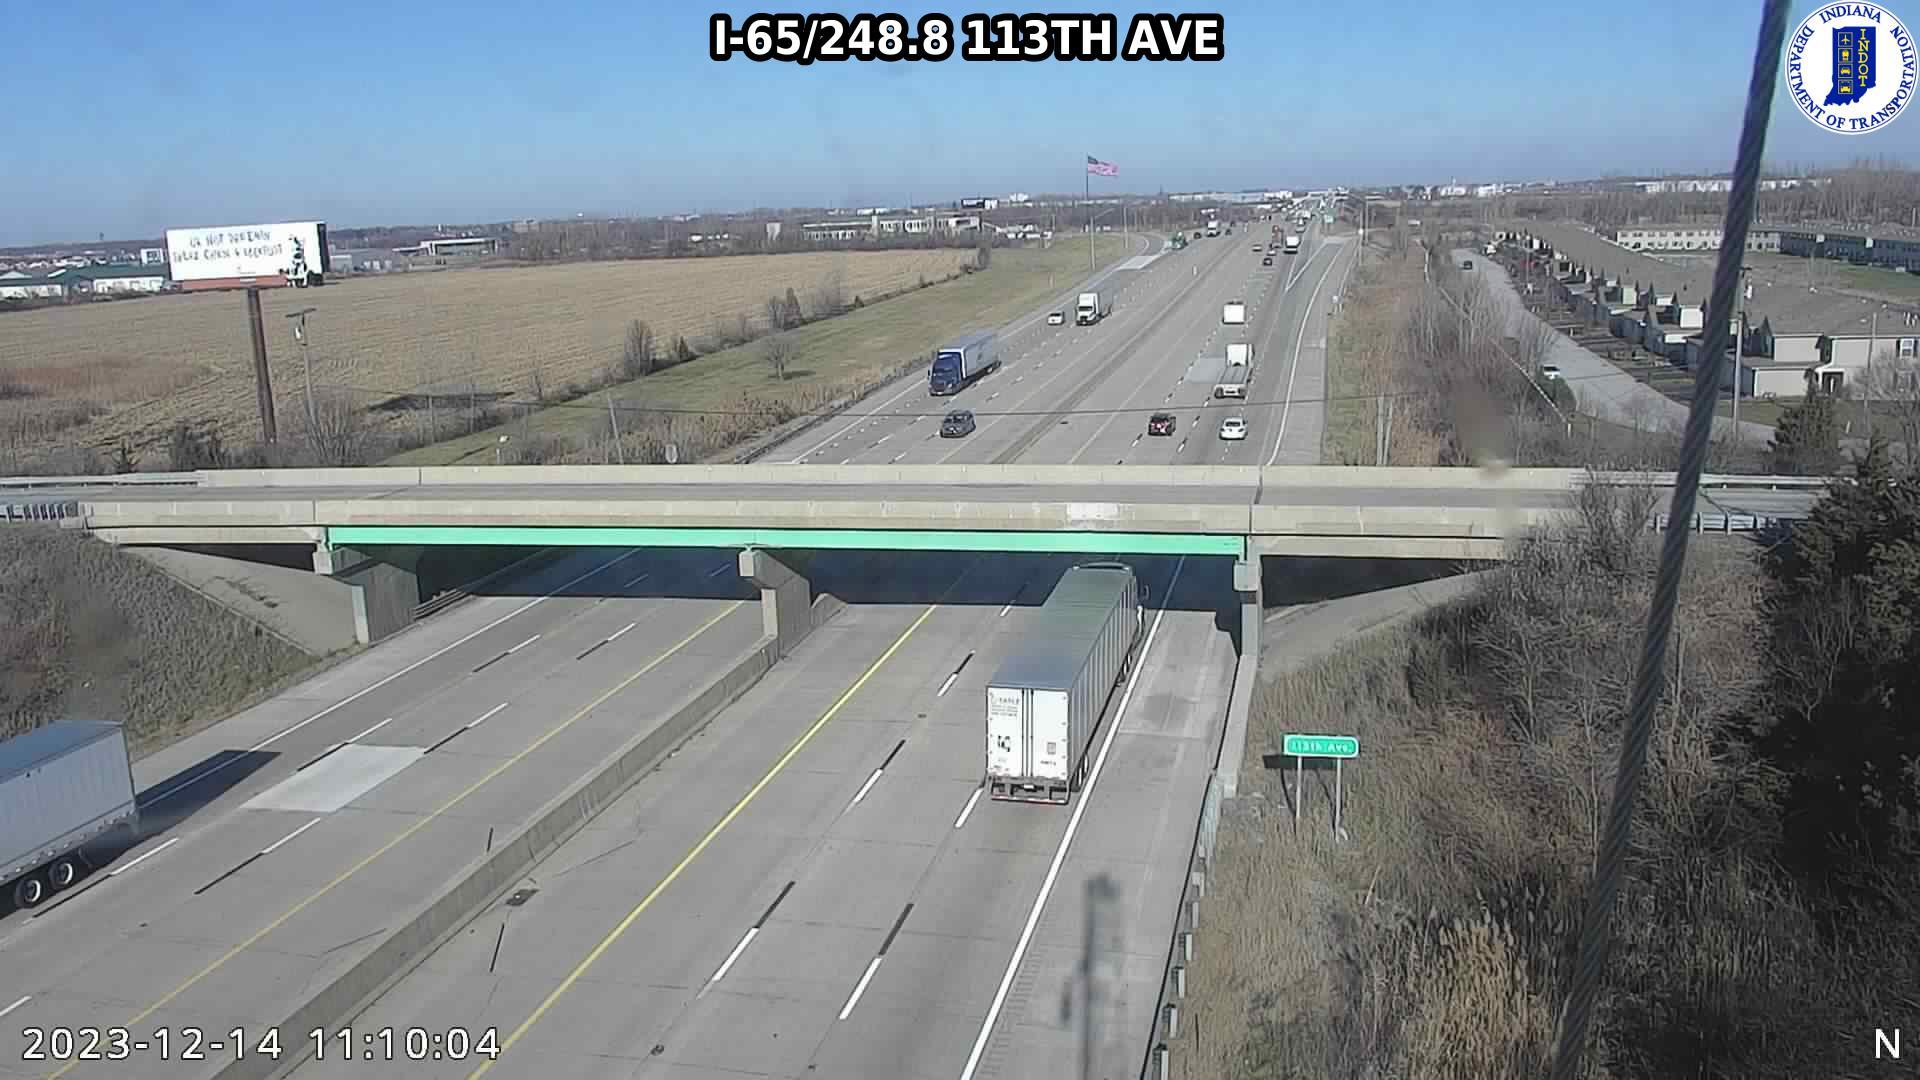 Traffic Cam Crown Point: I-65: I-65/248.8 113TH AVE : I-65/248.8 113TH AVE